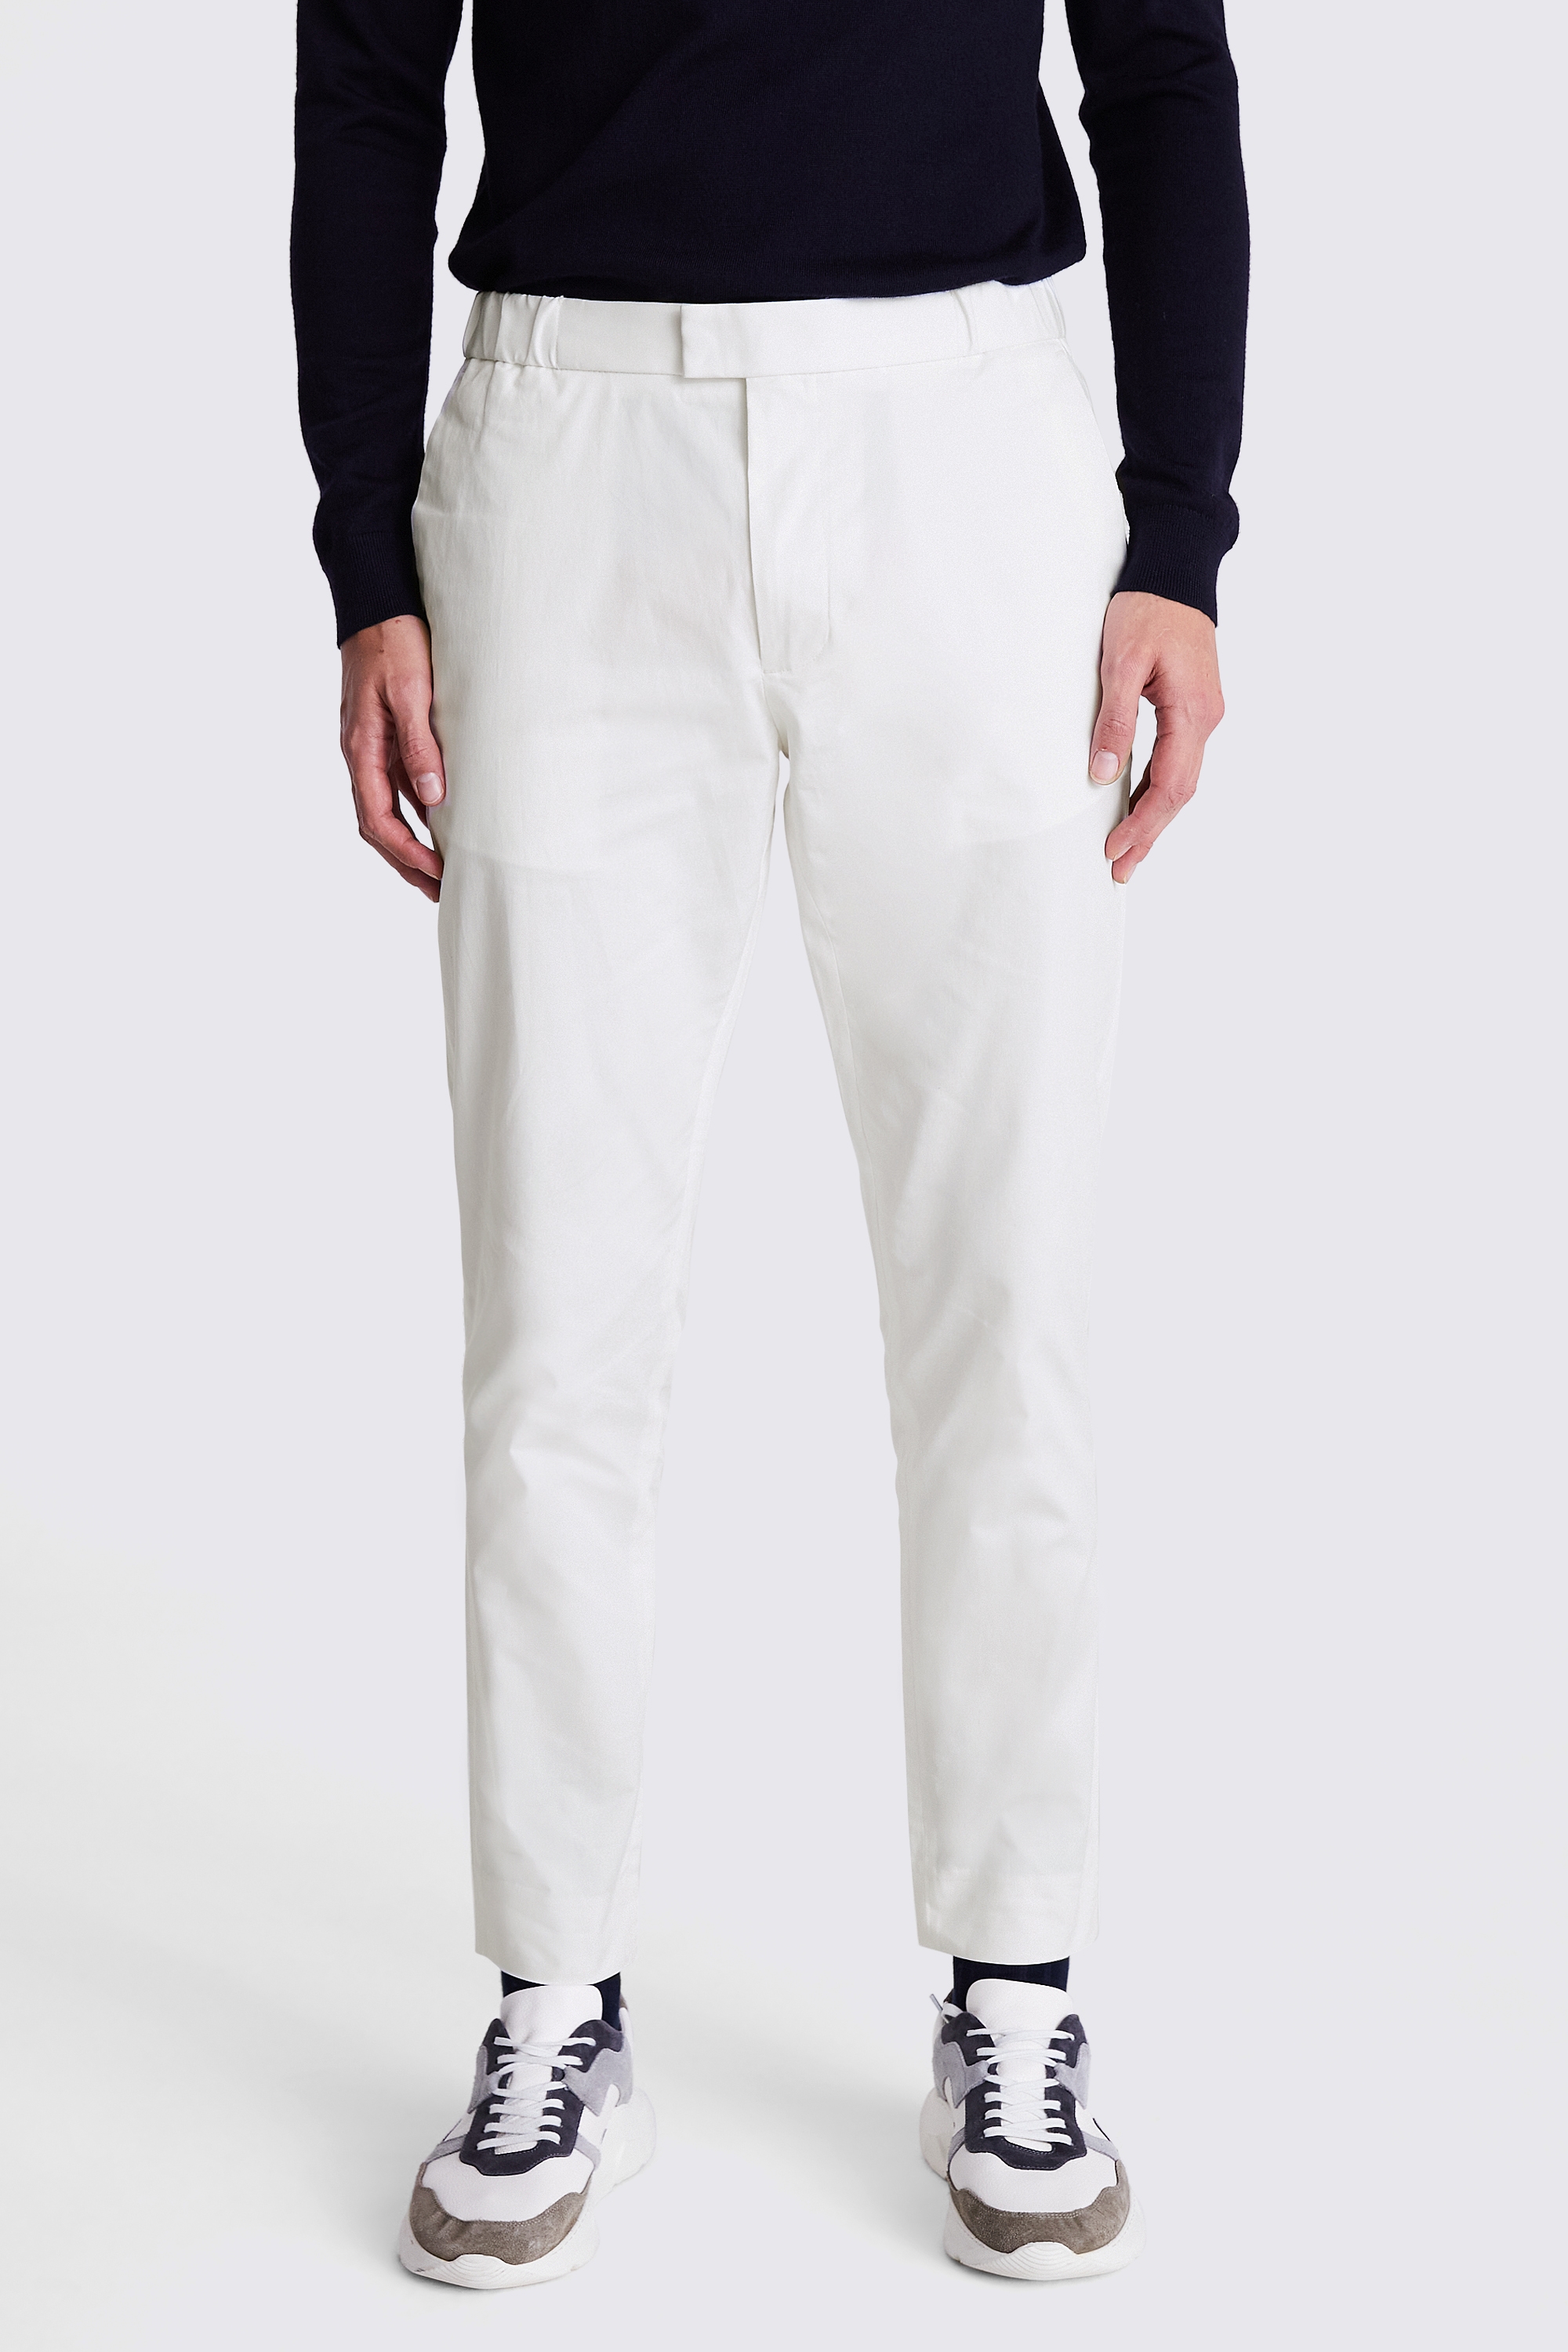 Off White Worker Chinos | Buy Online at Moss